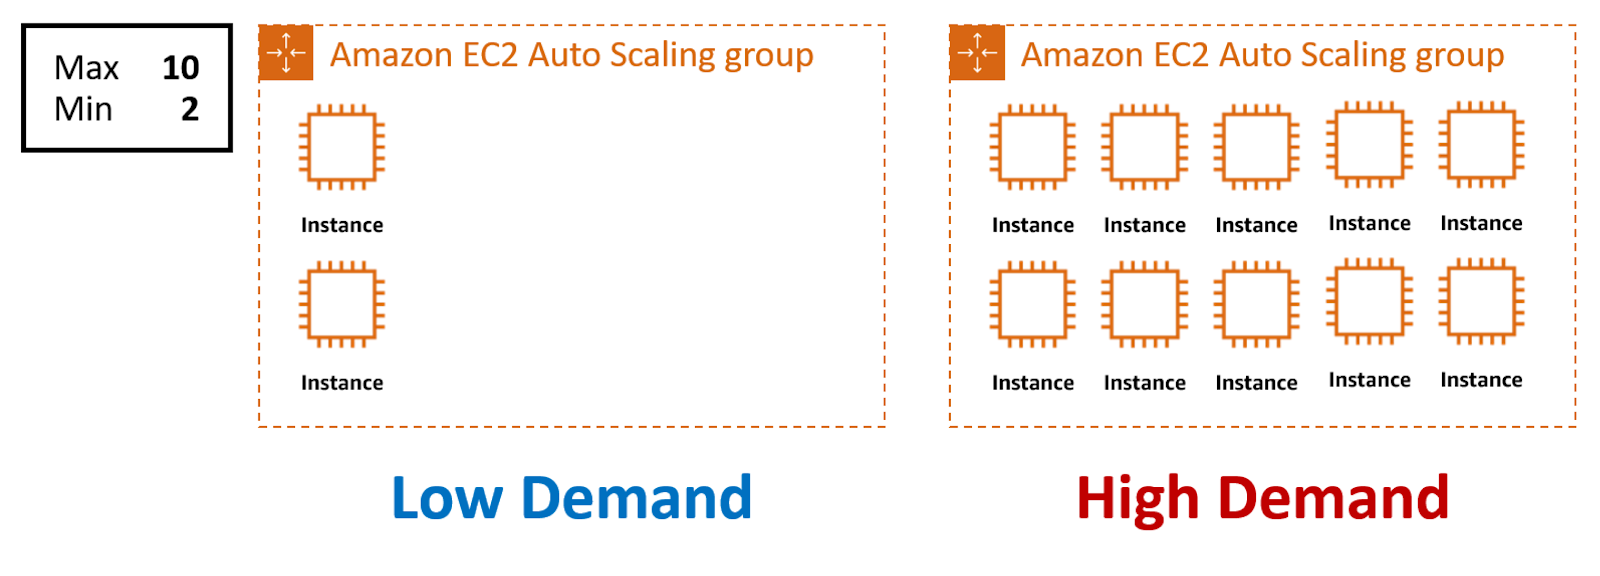 Amazon EC2 Auto Scaling group with maximum instances set to 10 and minimum set to 2. Low demand shows 2 instances provisioned, while high demand shows 10 instances.